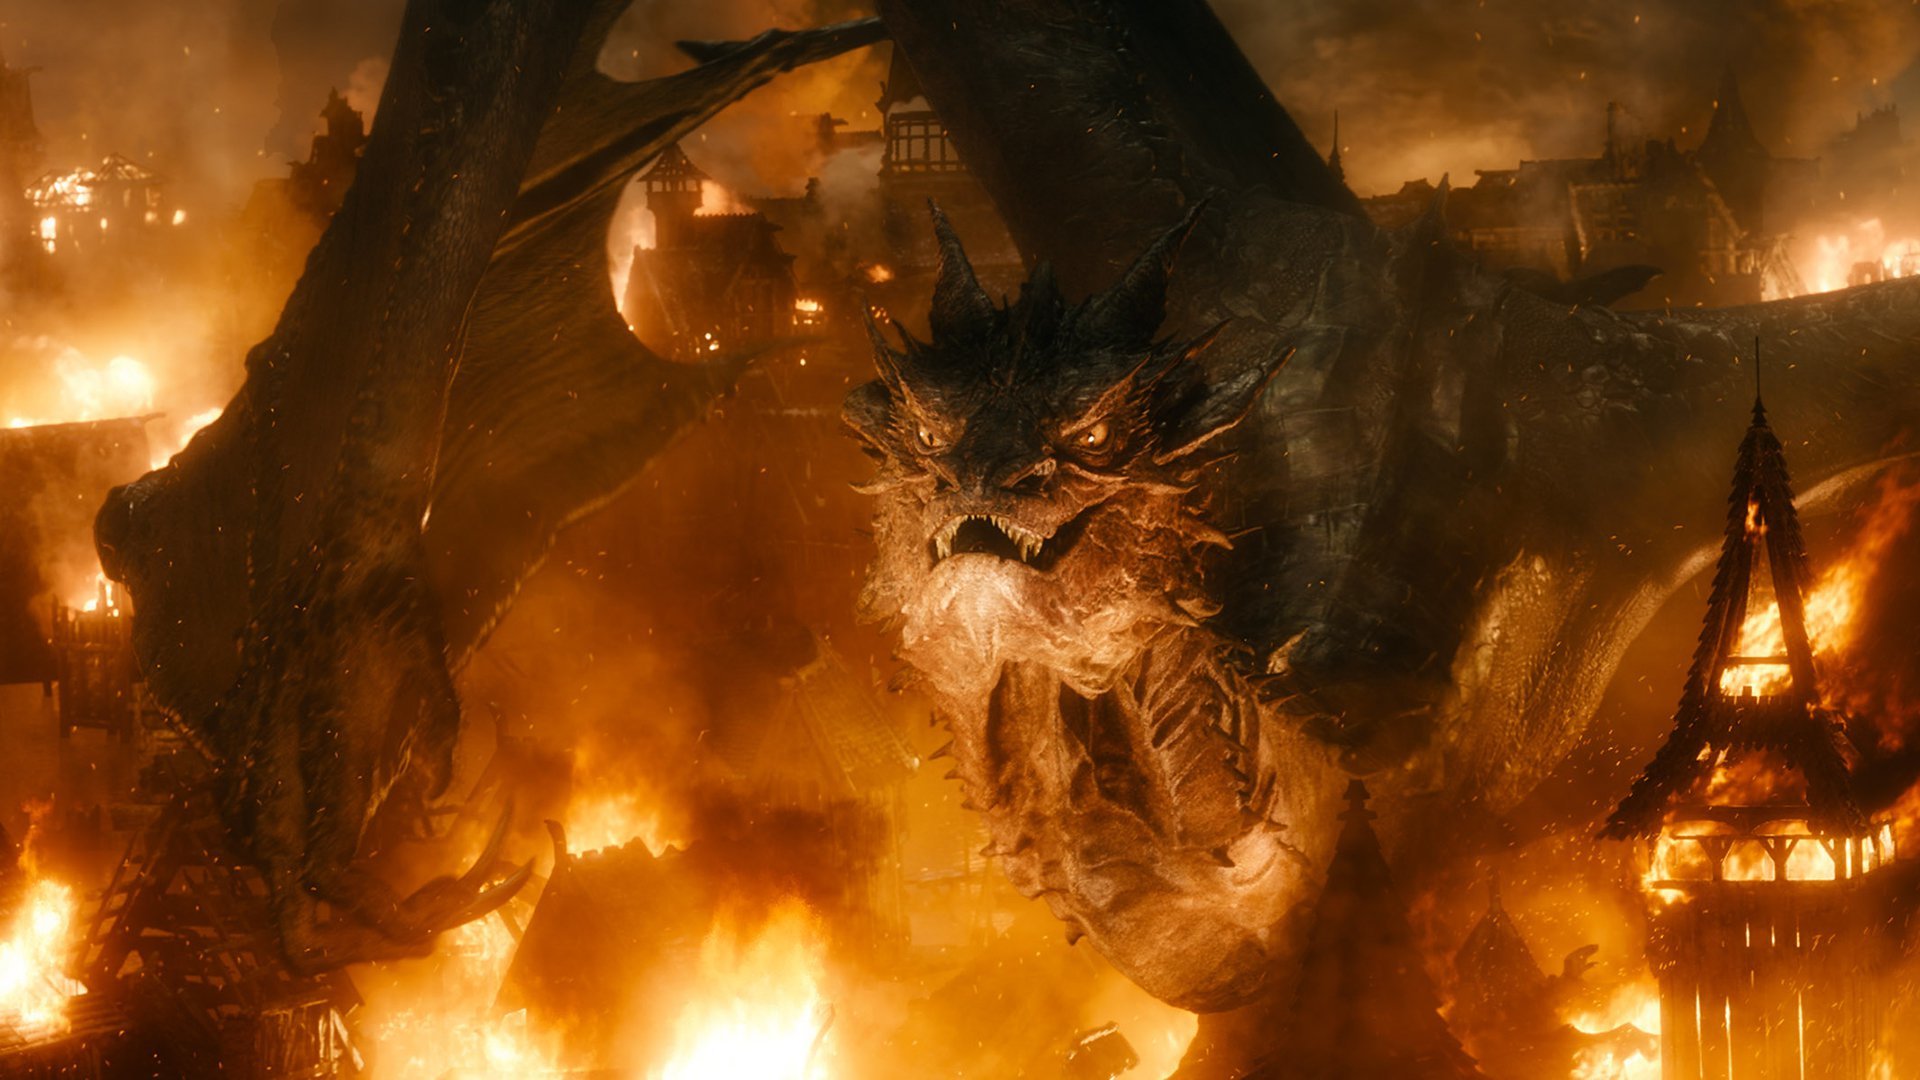 Awesome The Hobbit: The Battle Of The Five Armies free wallpaper ID:100601 for hd 1080p computer